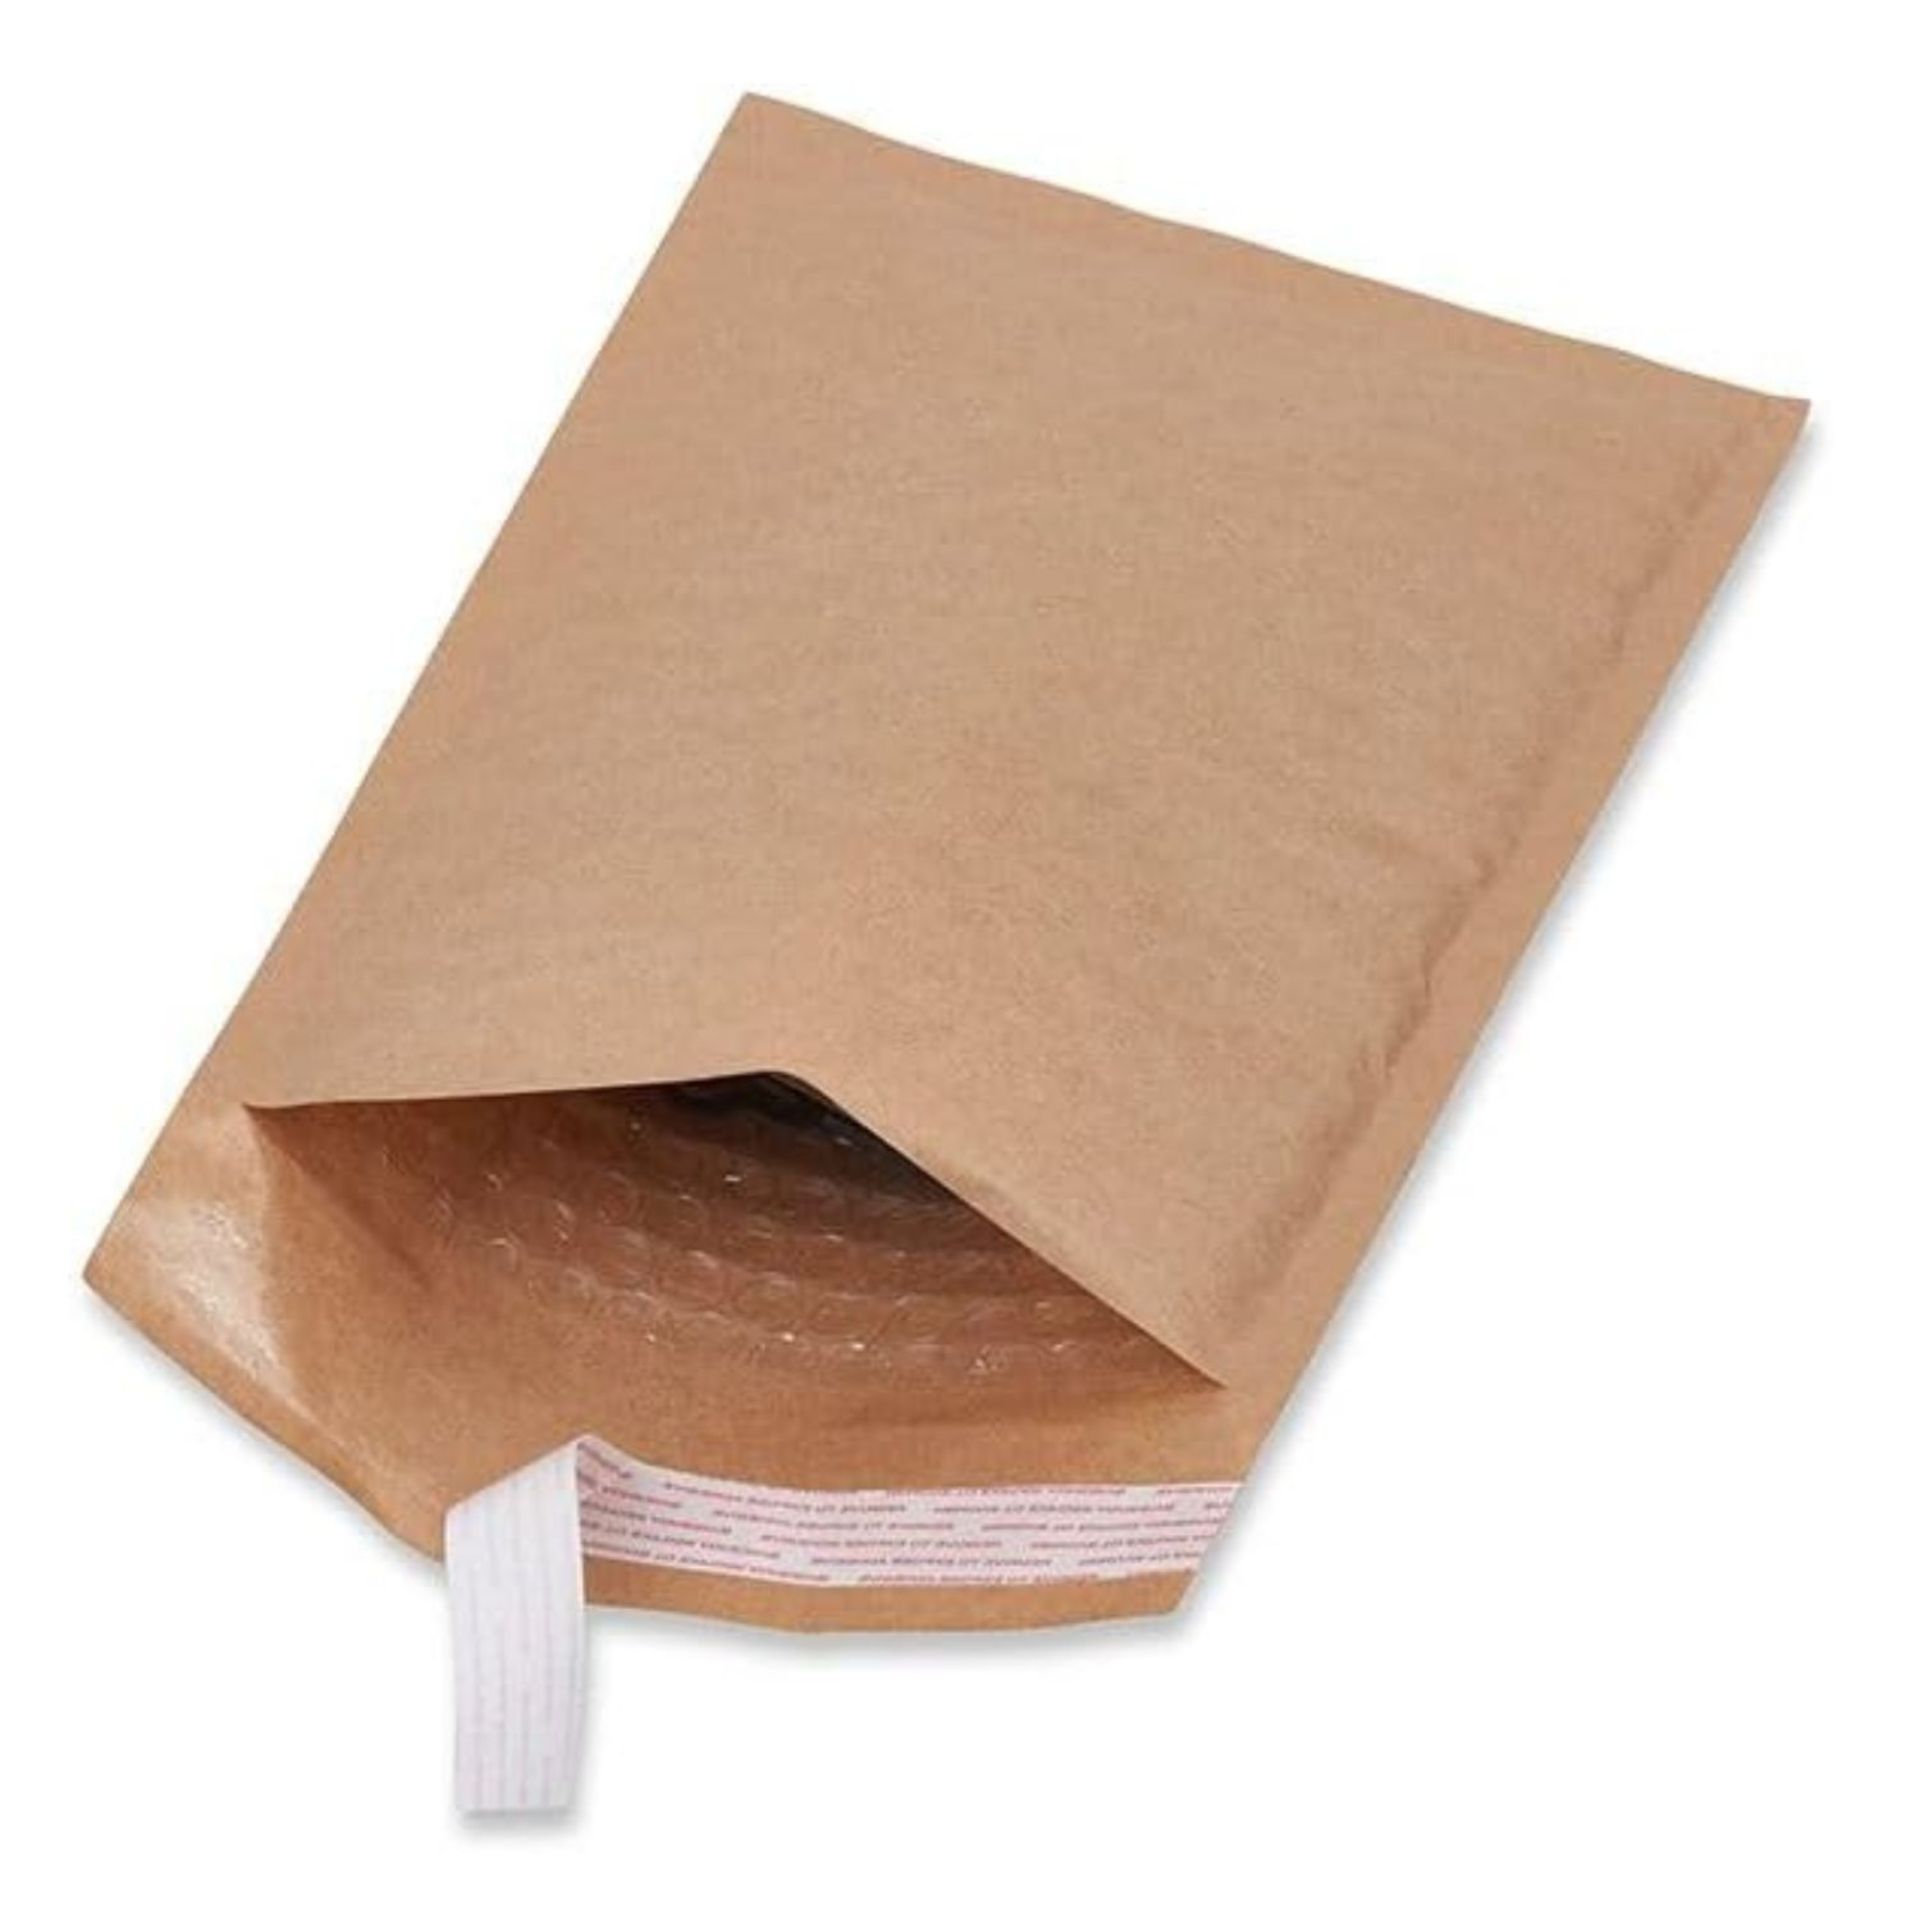 10 BOXES OF PAPER BAG ENVELOPES BUBBLE BAGS 100 PACK PEEL AND SEAL TOUGH LIGHT PADDED (200 X 260MM) - Image 2 of 4